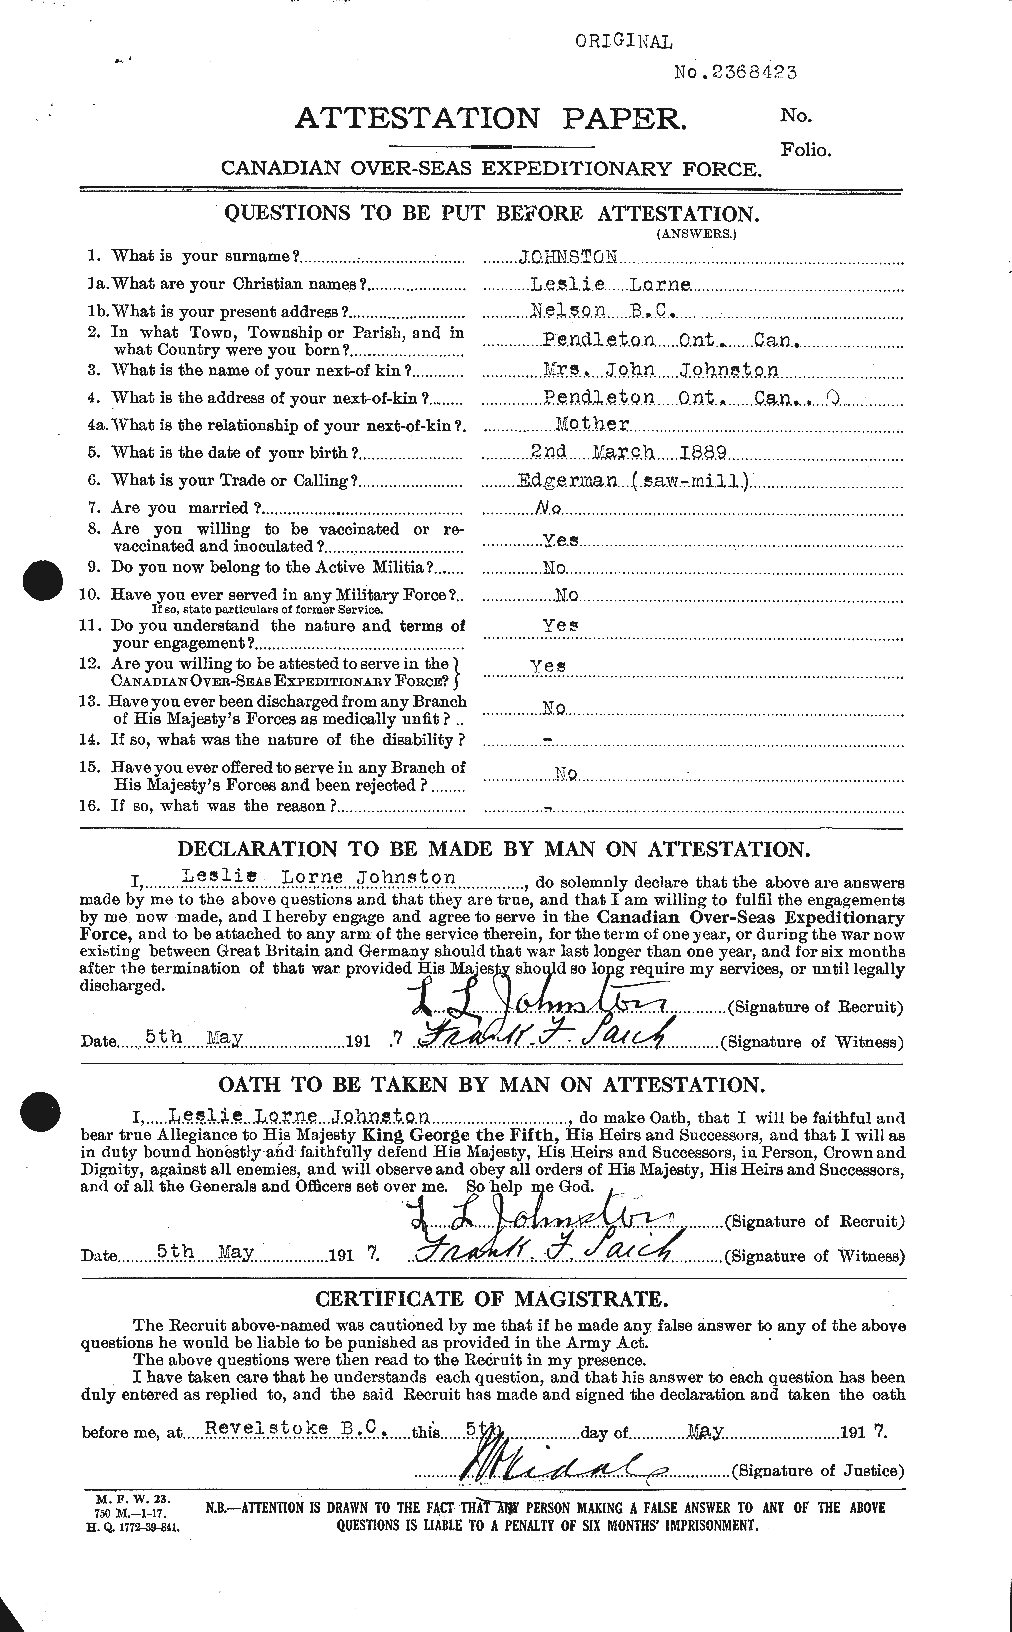 Personnel Records of the First World War - CEF 422945a